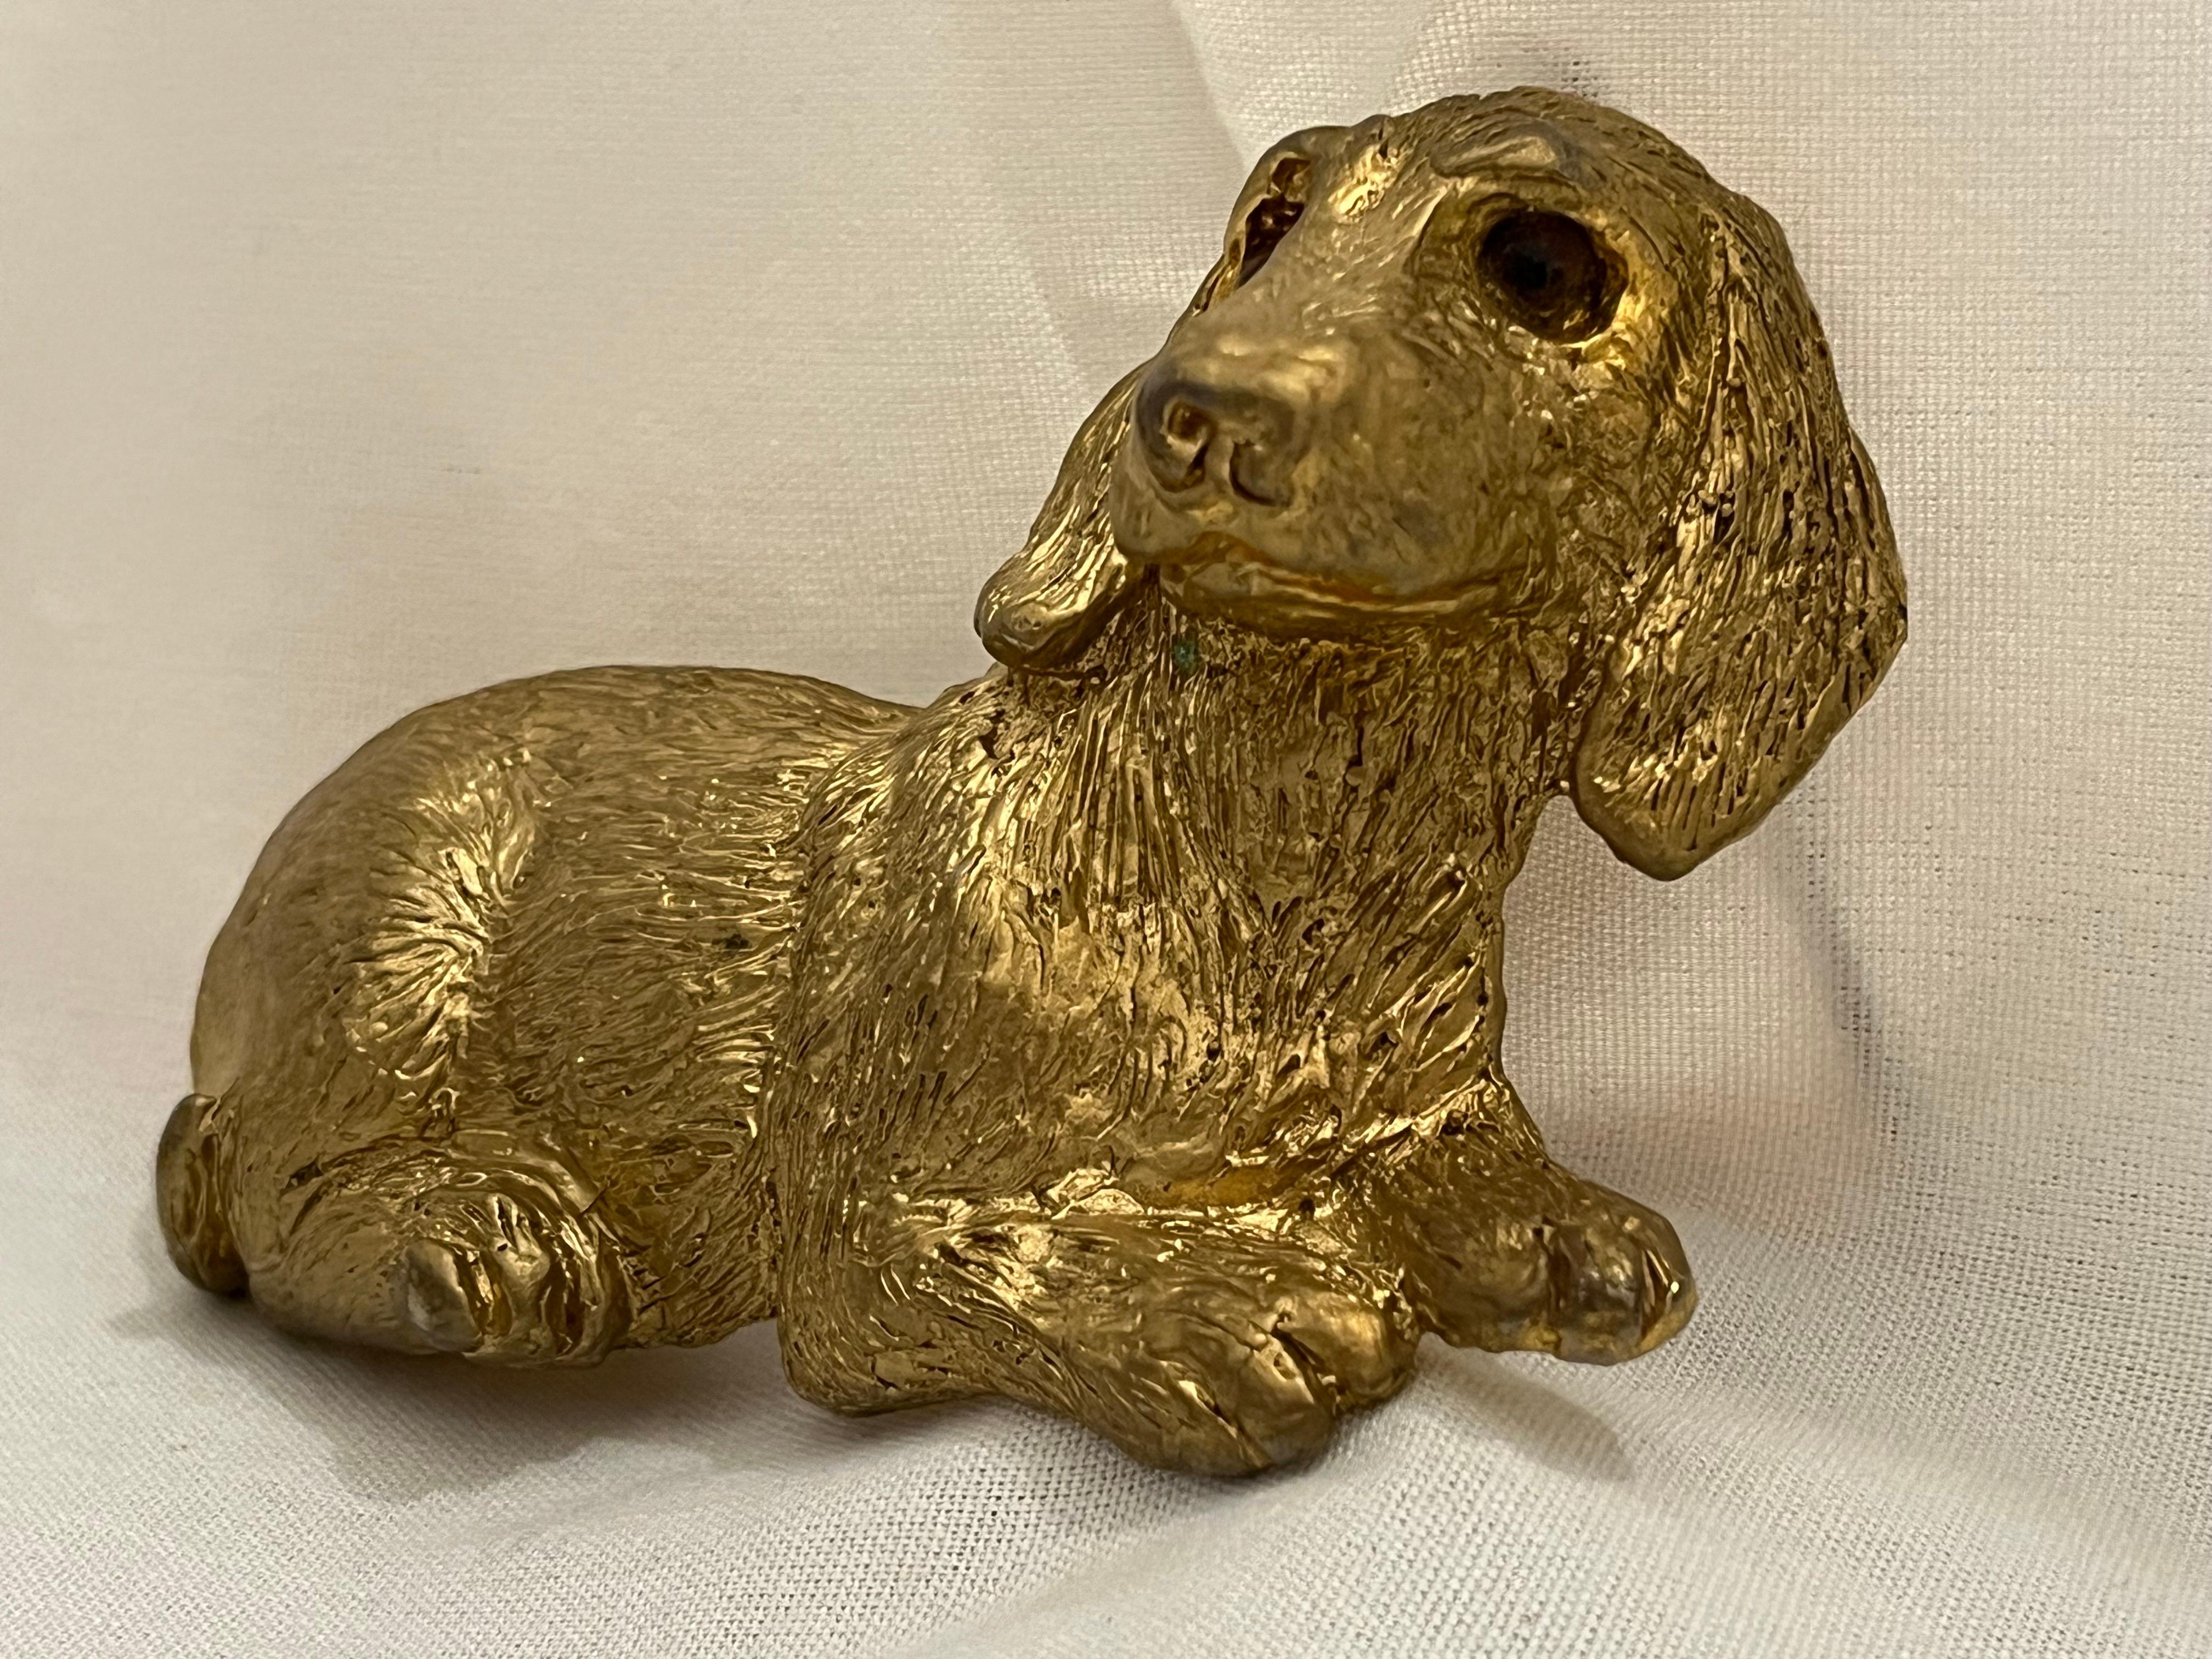 Vintage 1992 Mimi Di Niscemi Signed Golden Dachshund Belt Buckle with Brown Eyes For Sale 1